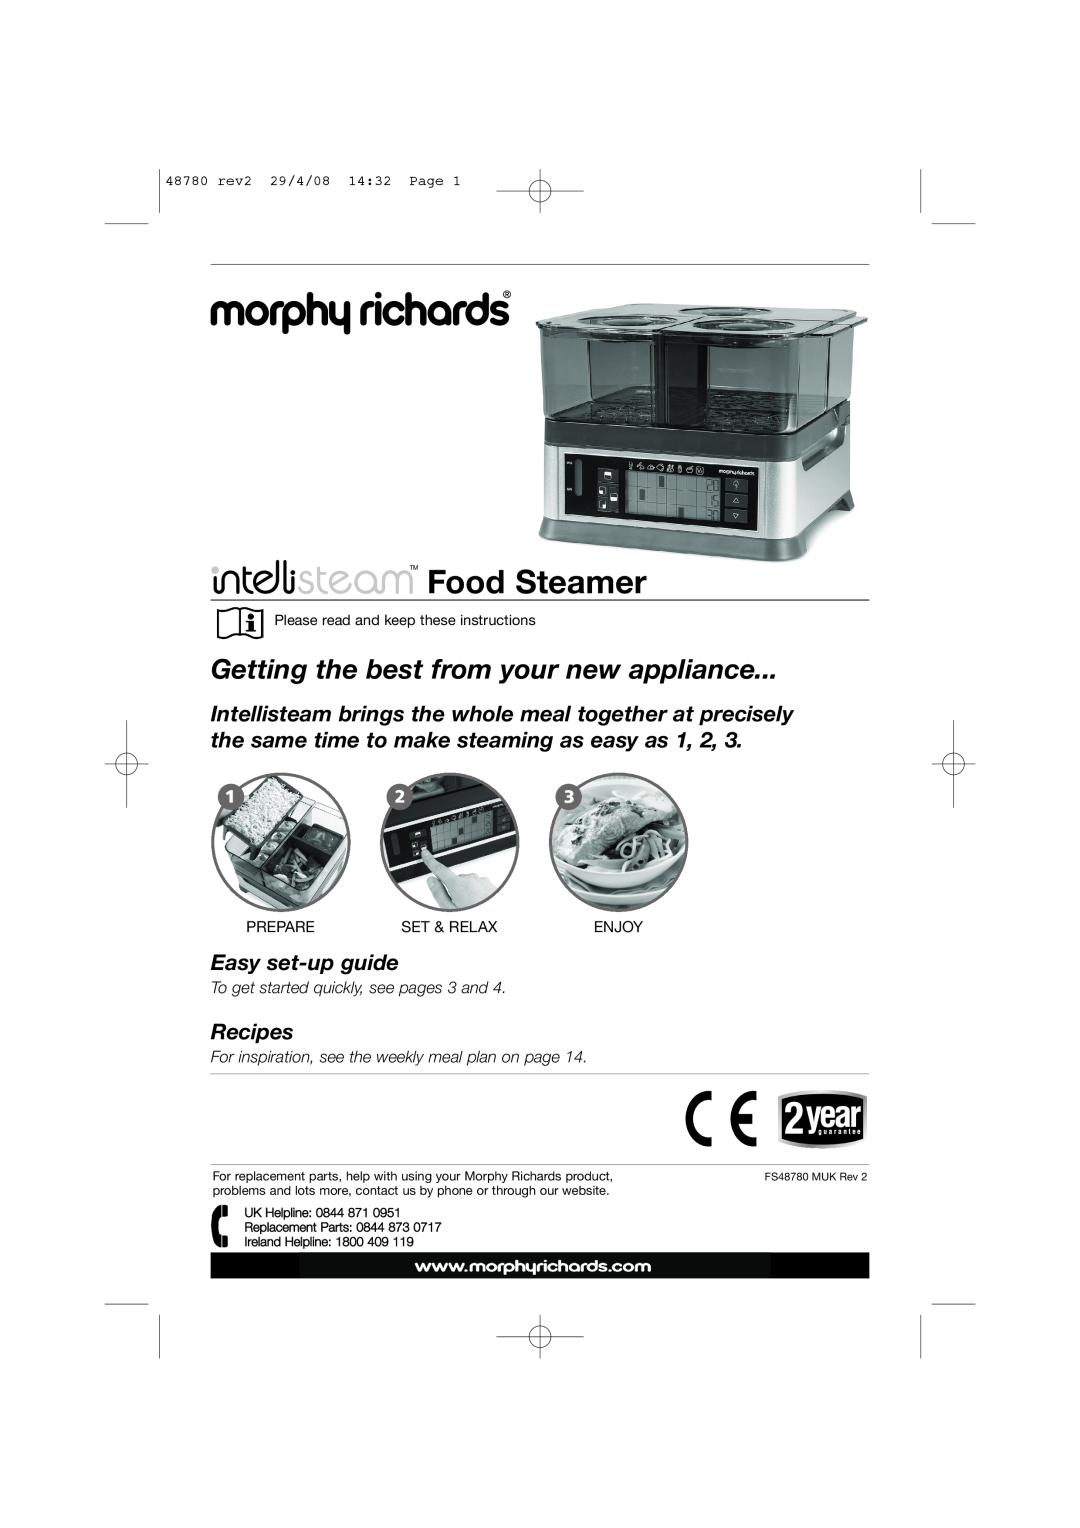 Morphy Richards Intellisteam setup guide TM Food Steamer, Getting the best from your new appliance, Ú Û Ü, Recipes 